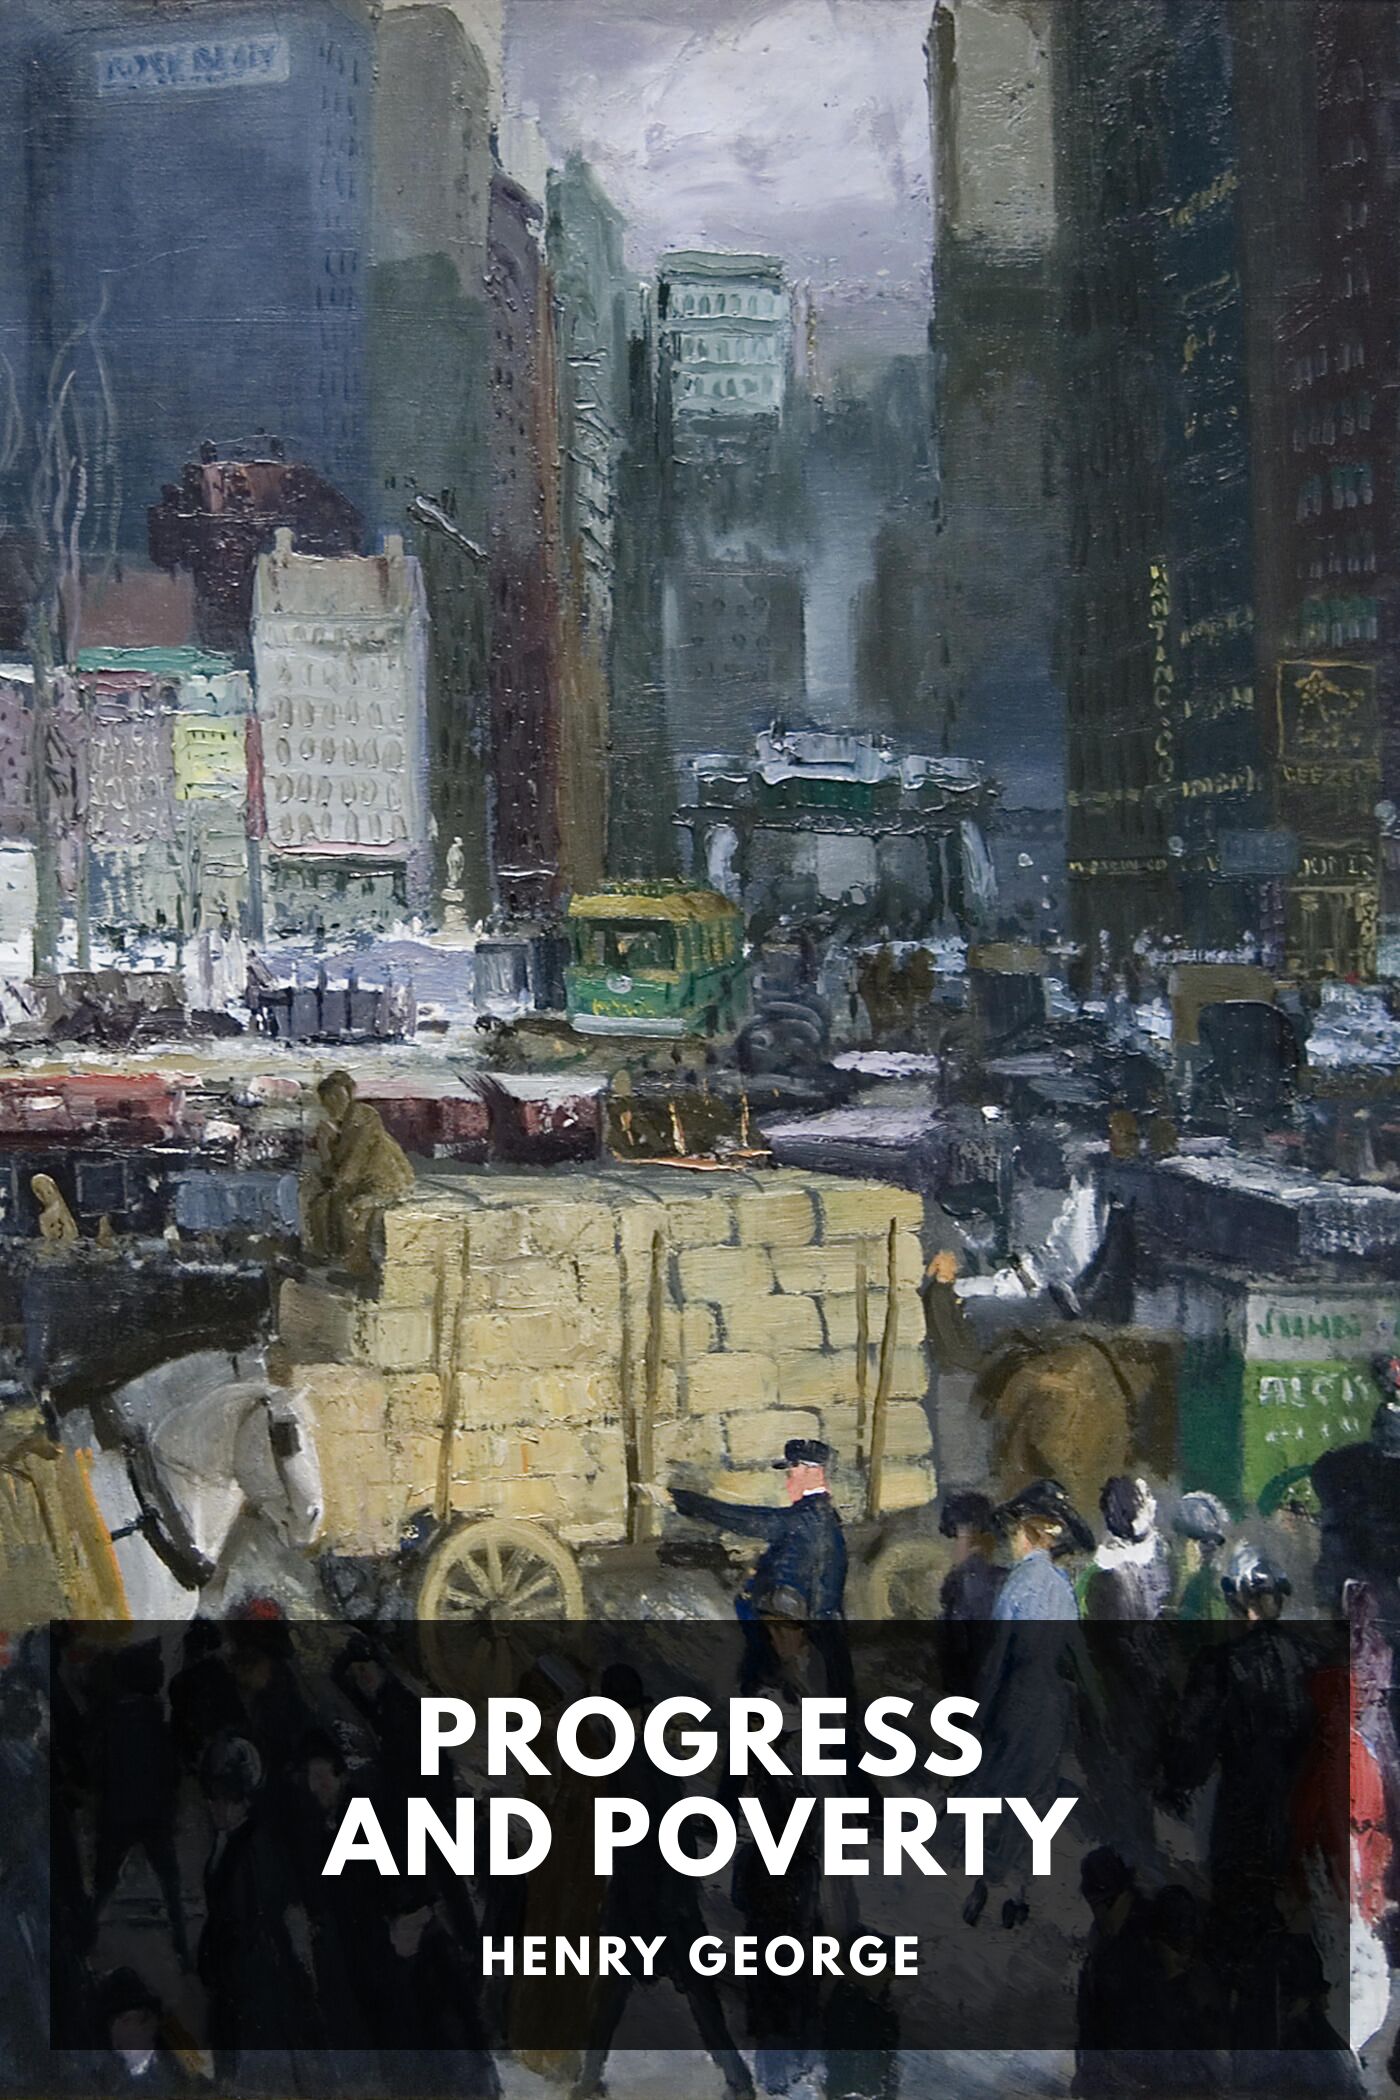 Progress and Poverty  Online Library of Liberty